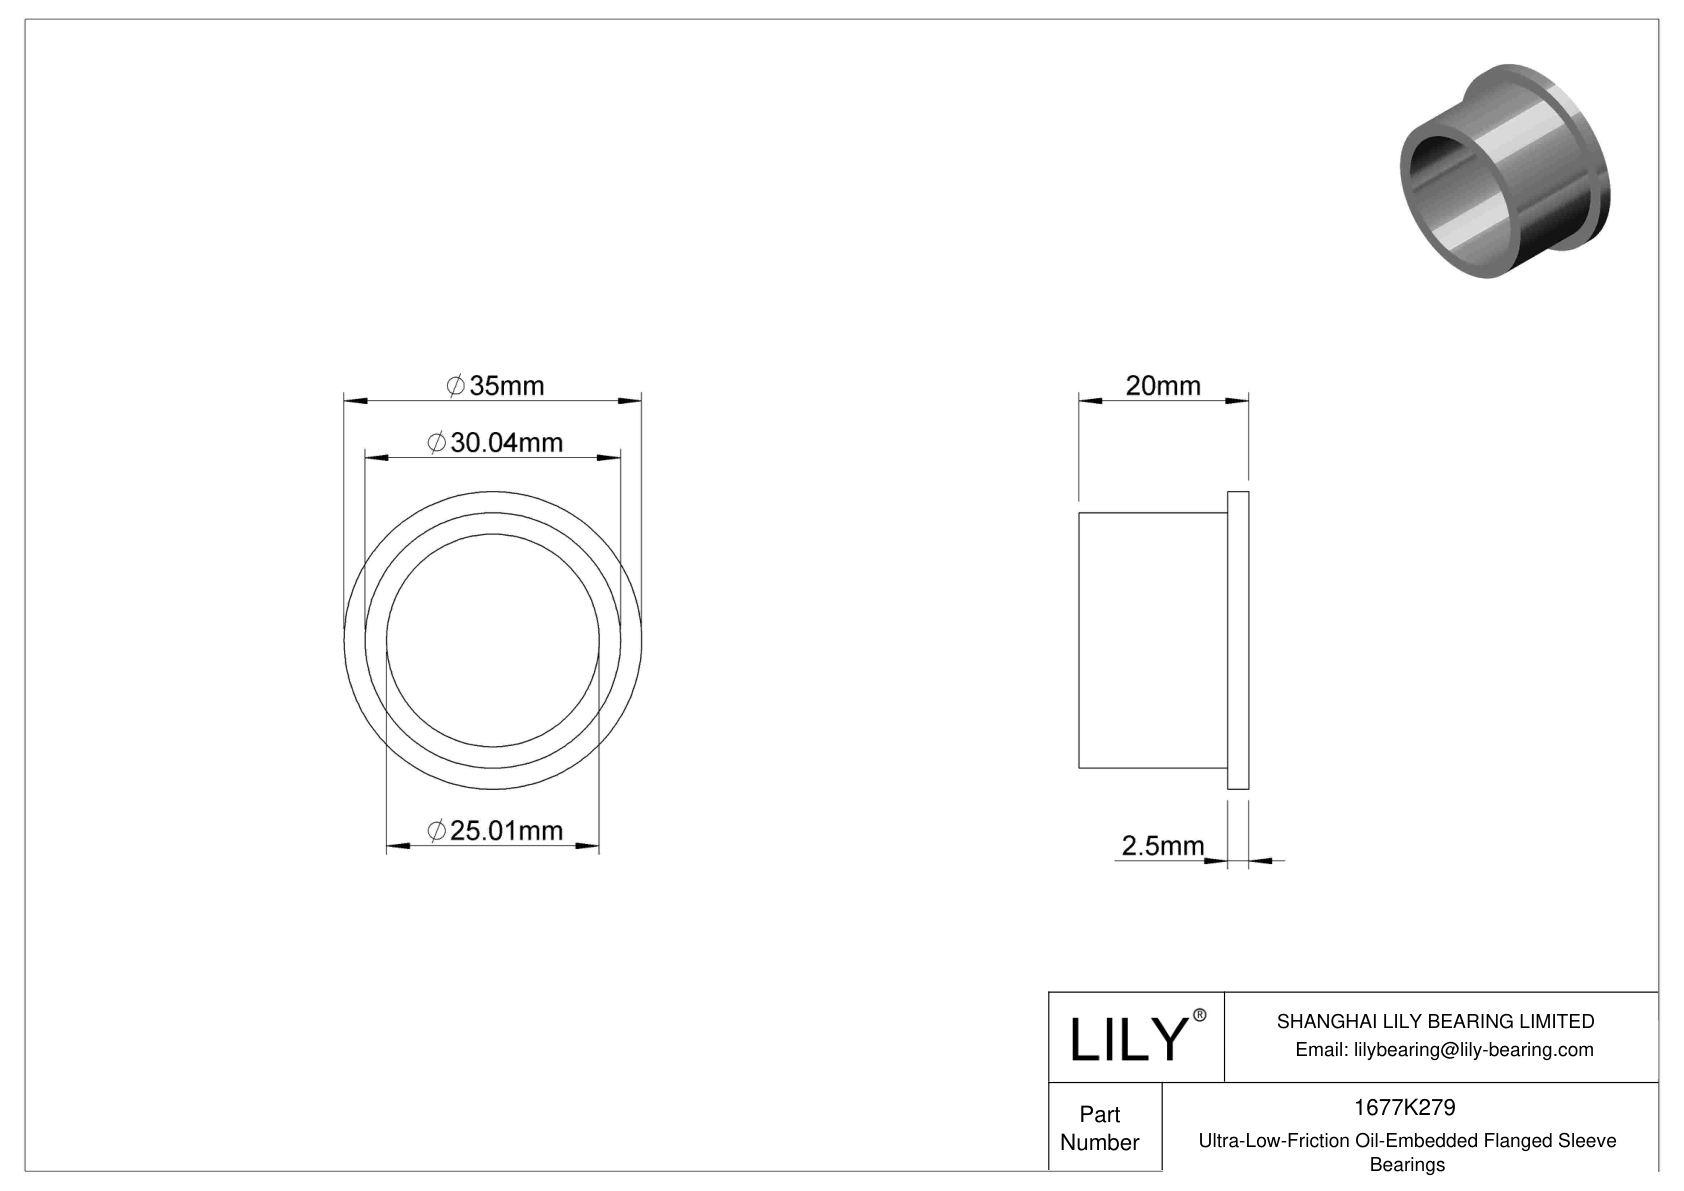 BGHHKCHJ Ultra-Low-Friction Oil-Embedded Flanged Sleeve Bearings cad drawing